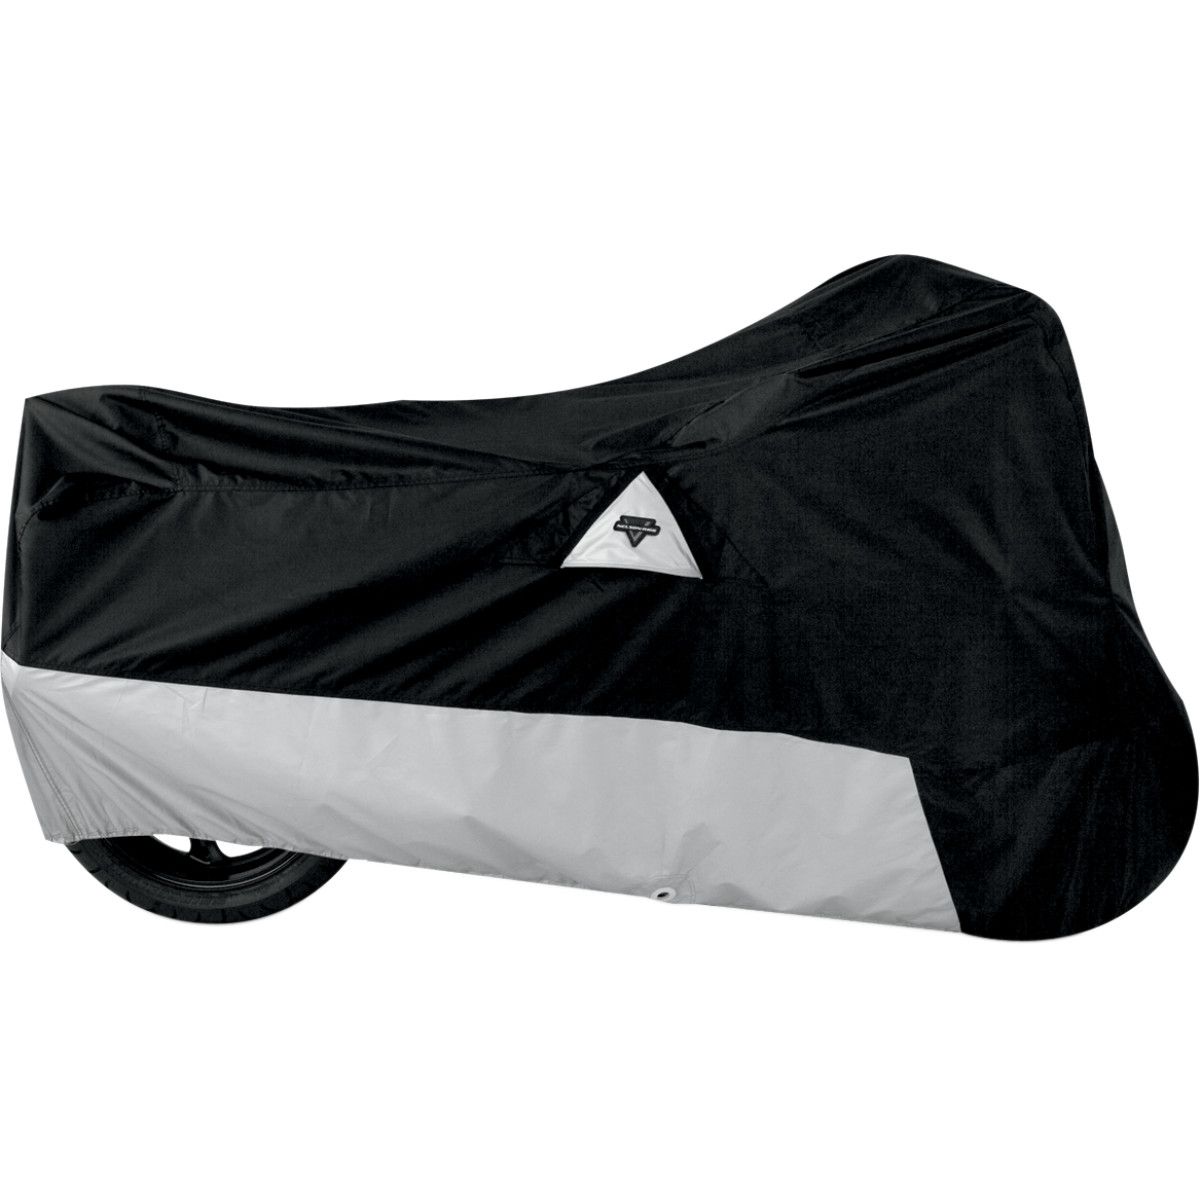 Nelson-Rigg Falcon Defender 400 Motorcycle Cover